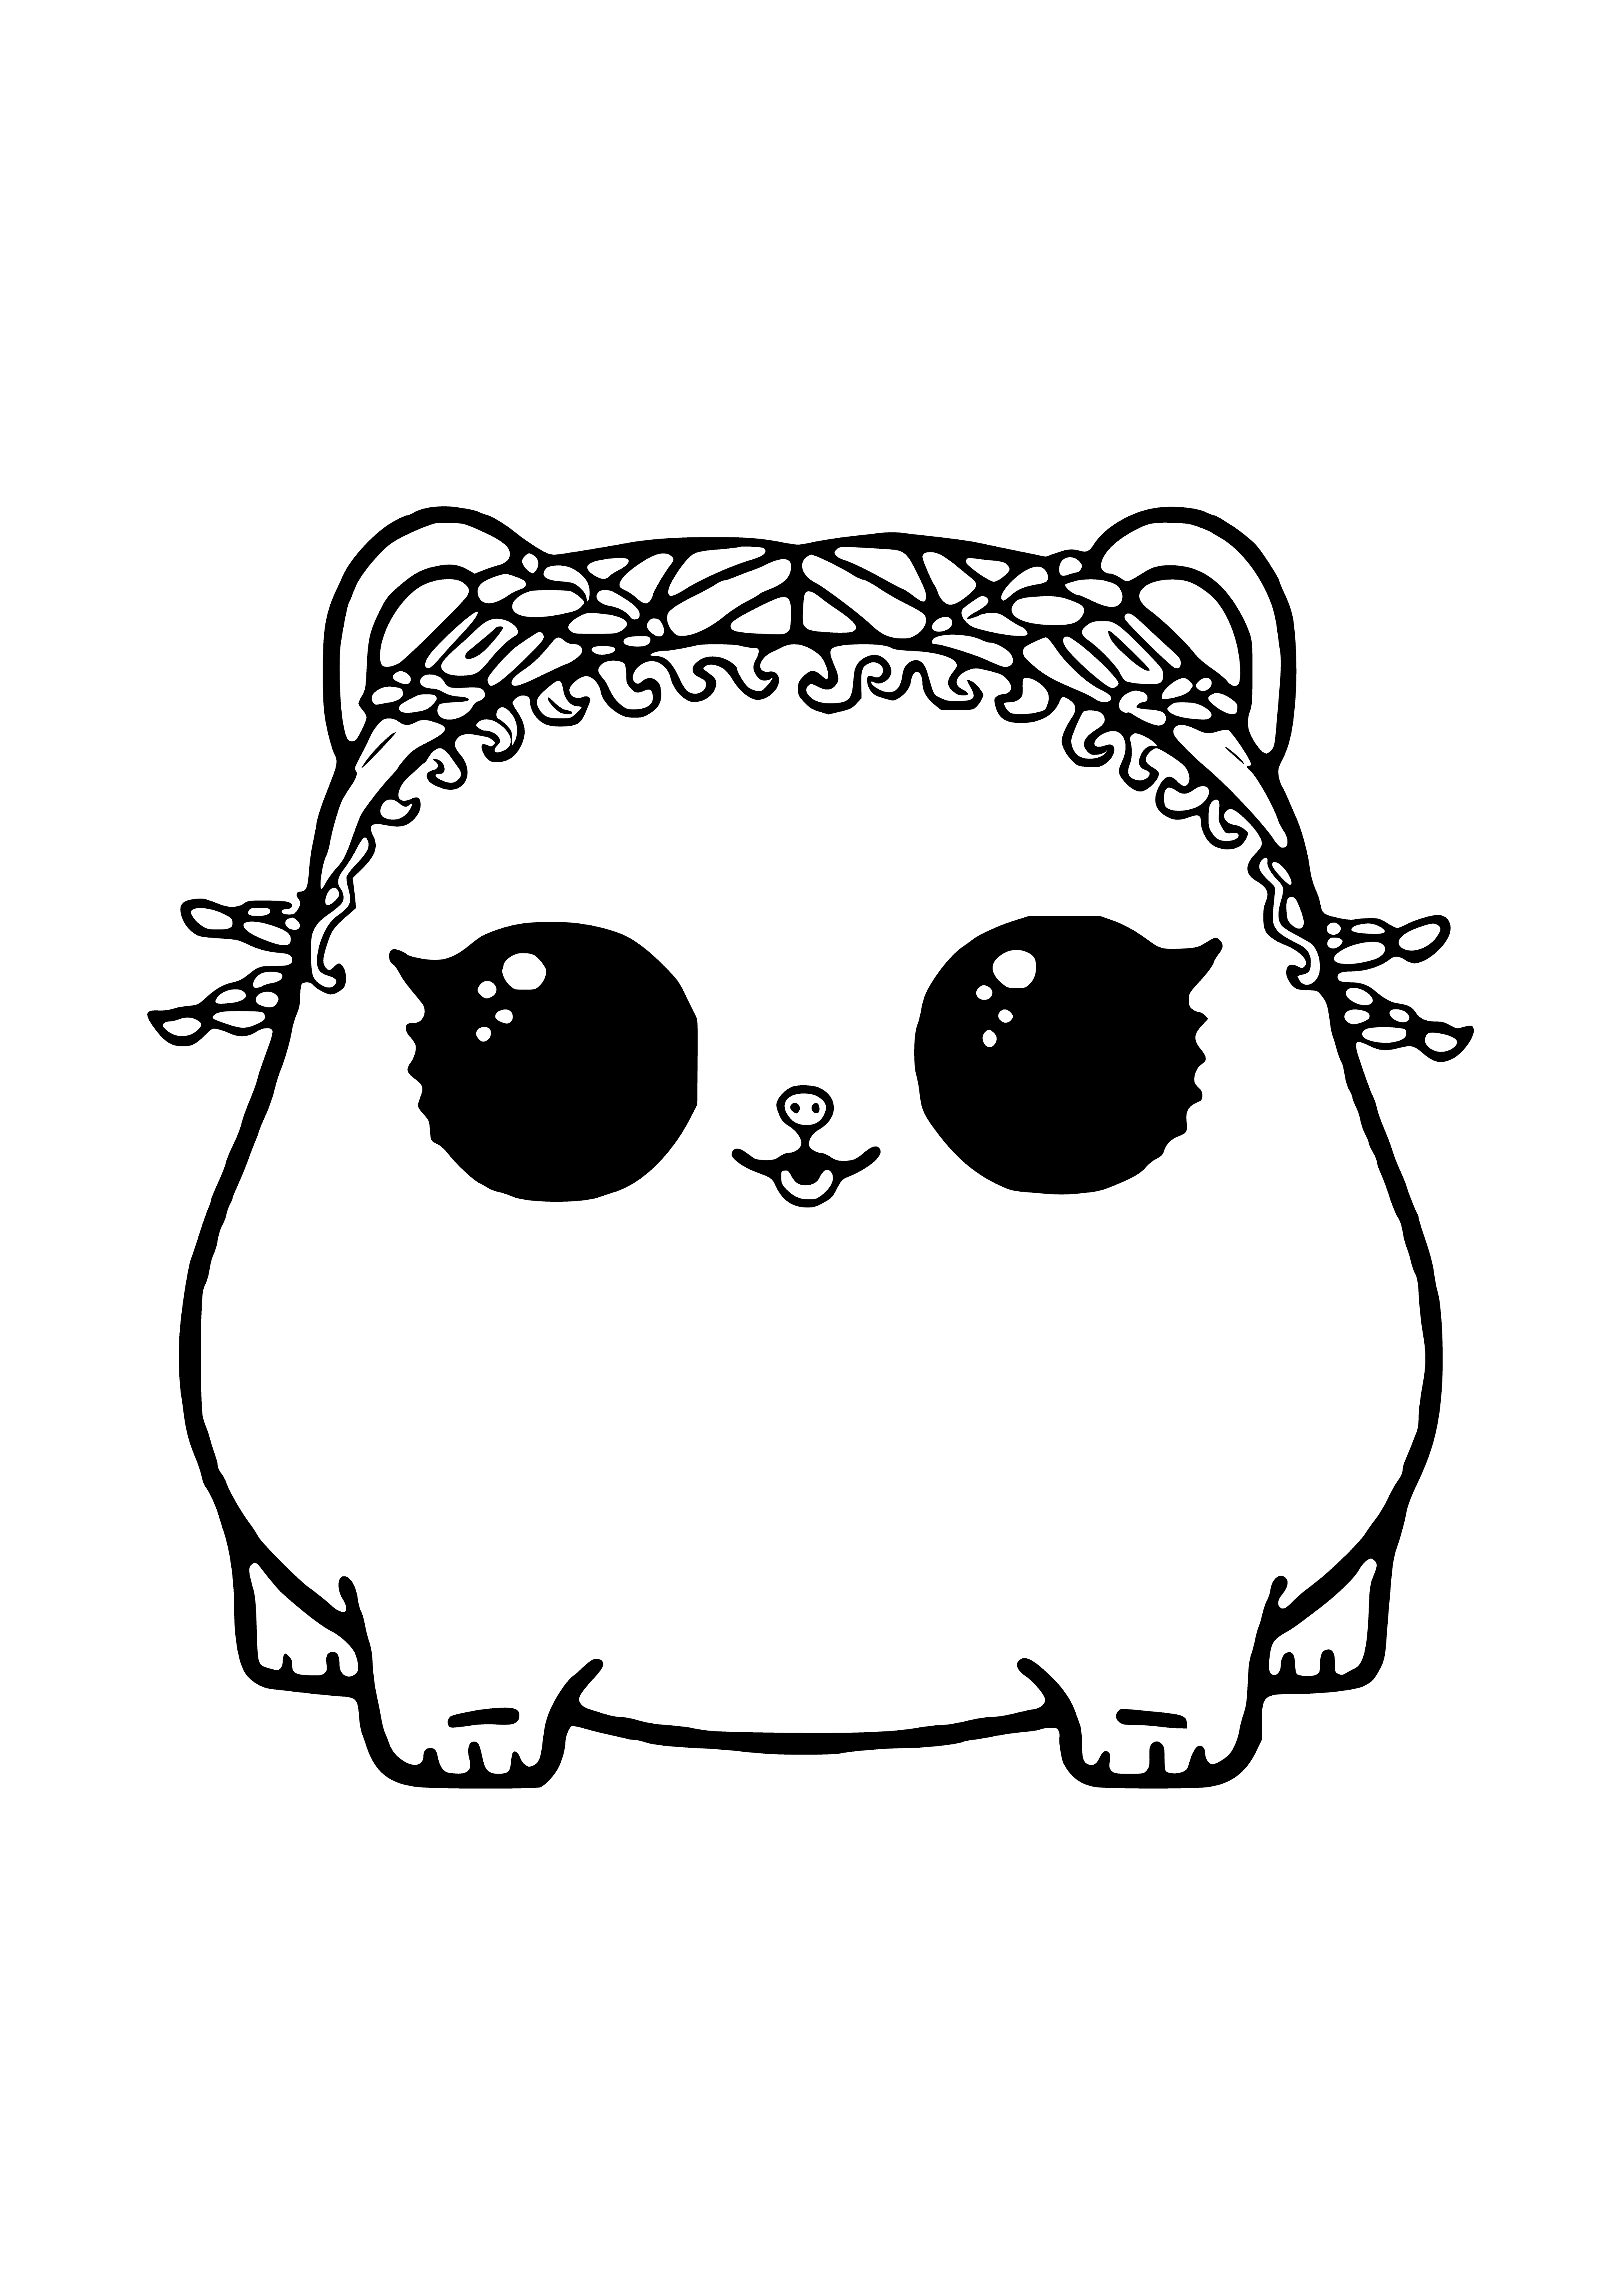 LOL pet Hamster coloring page